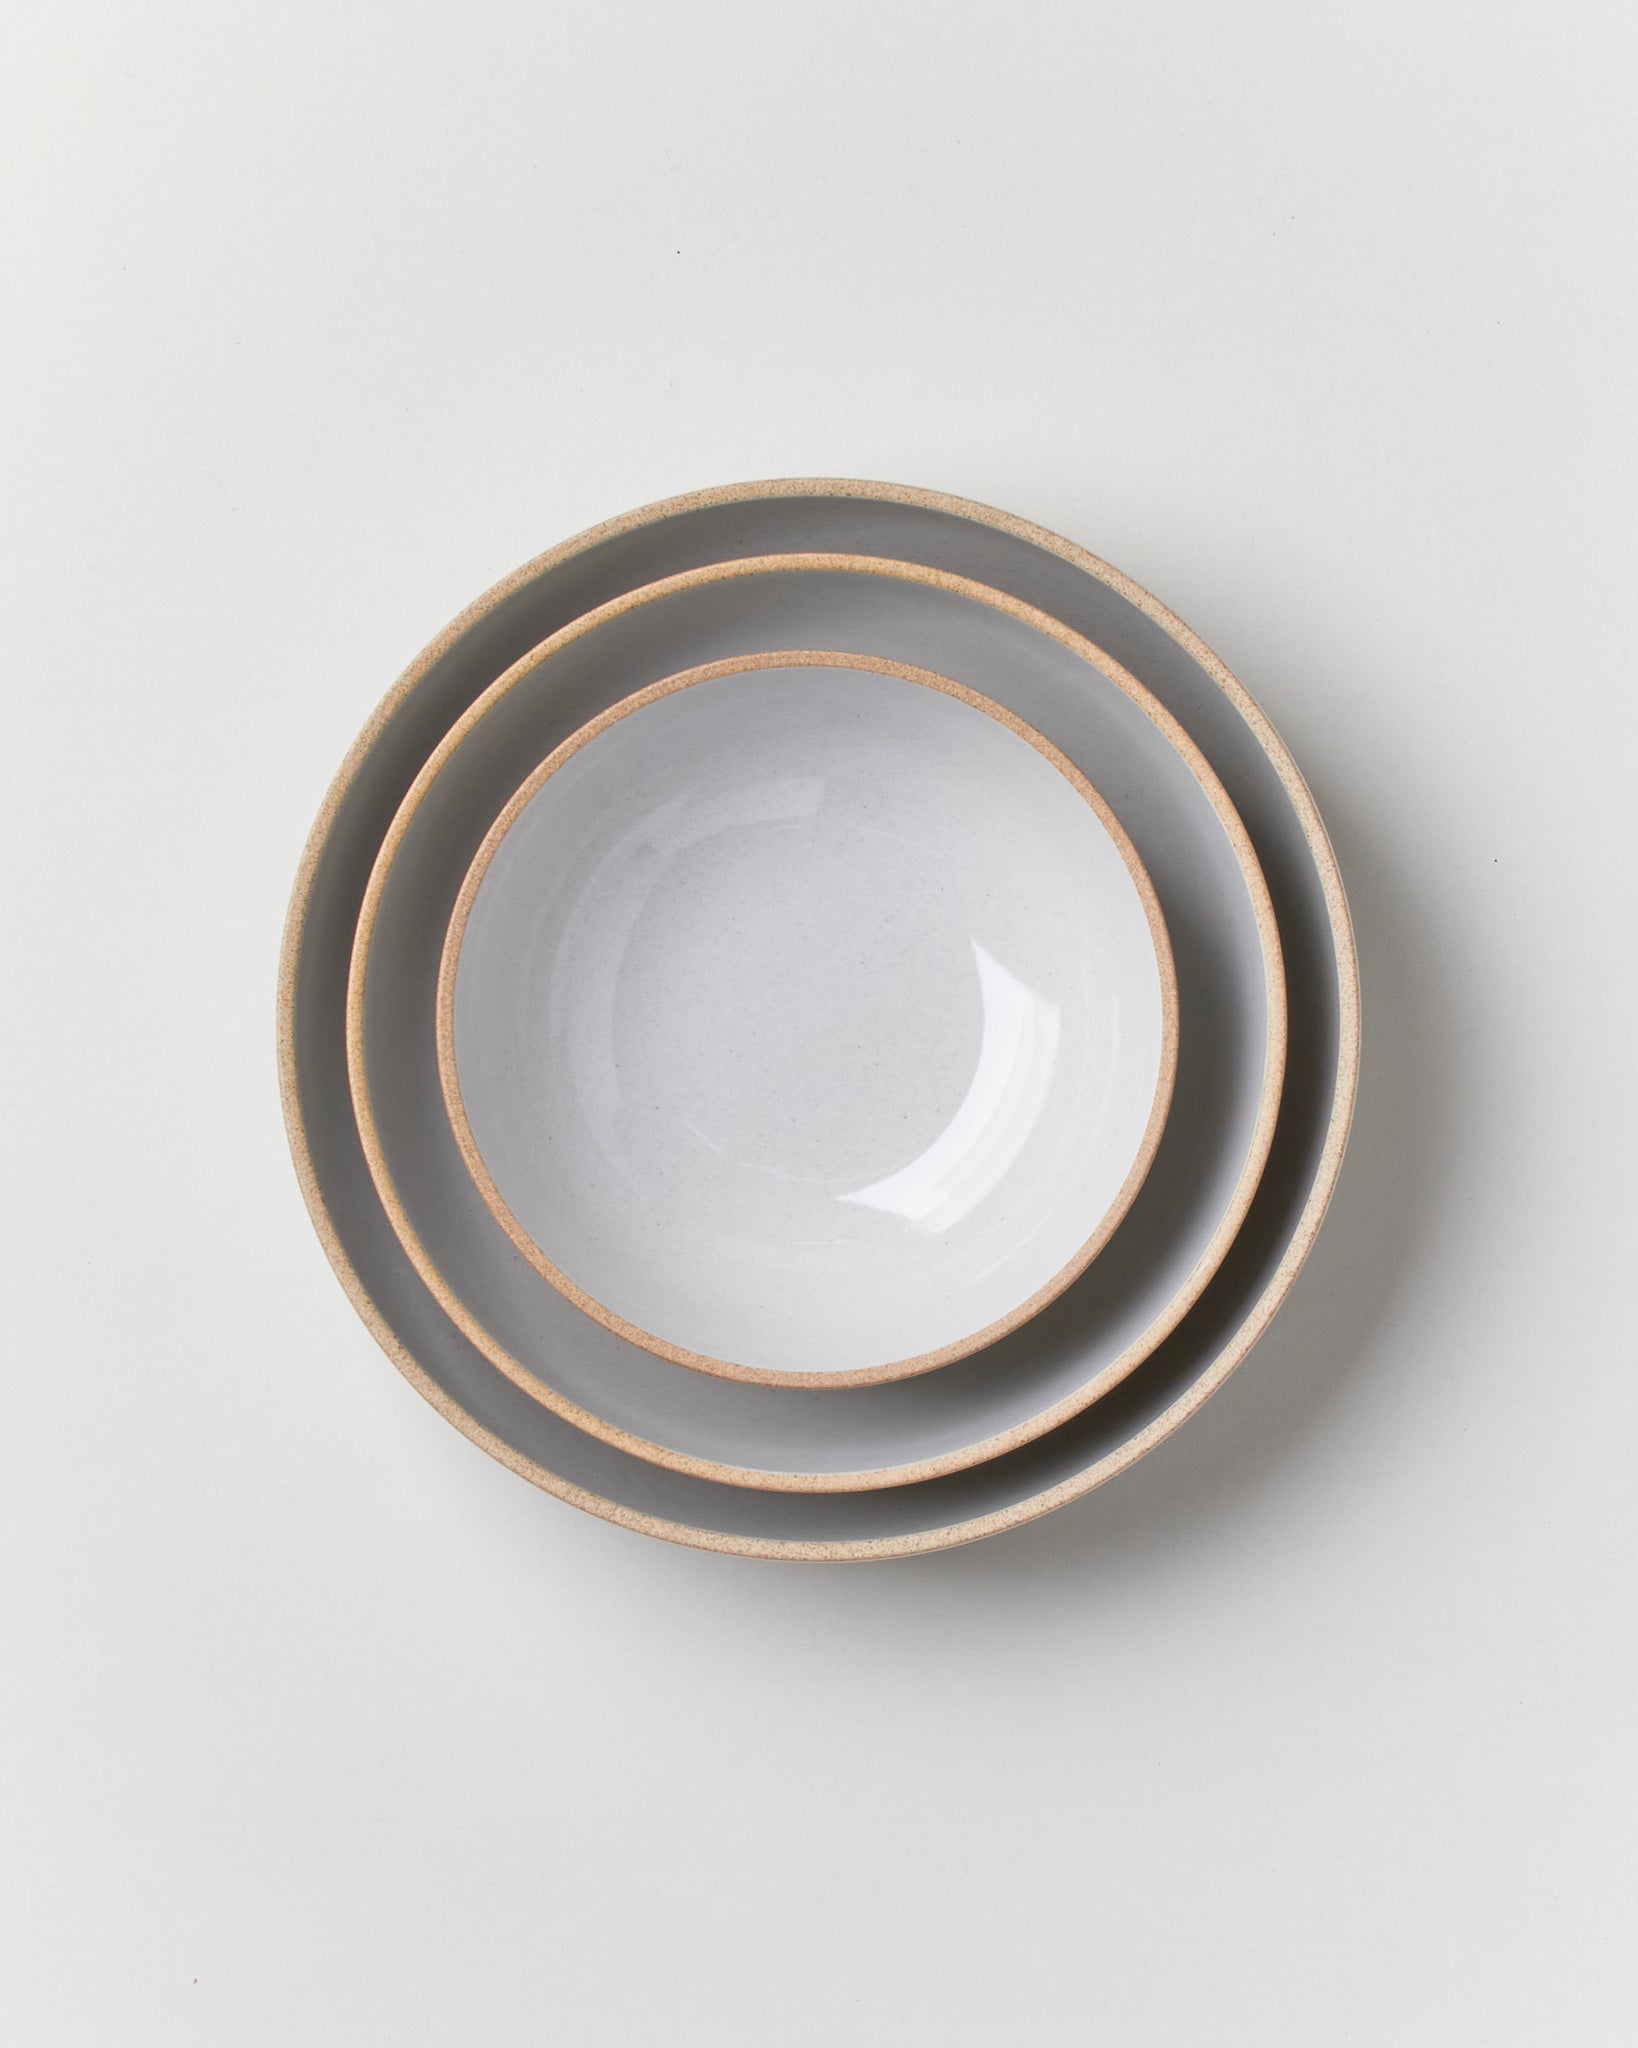 Hasami 7 3/8-inch Round Bowl in Gloss Grey